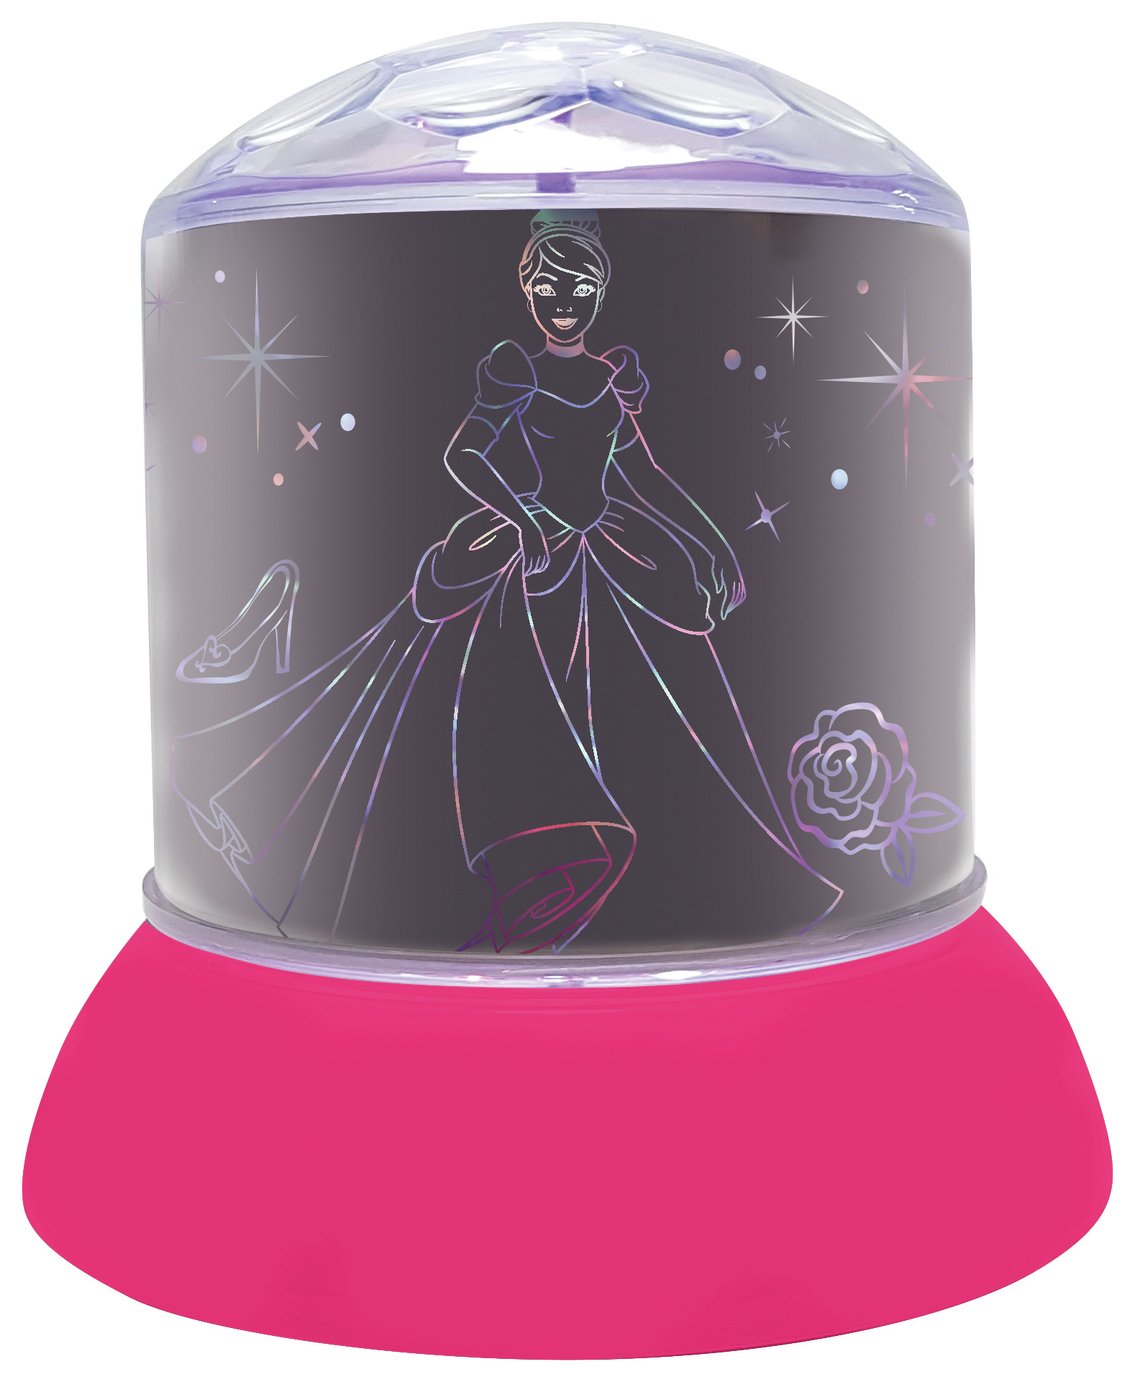 Disney Princess Projector Reviews - Updated March 2022